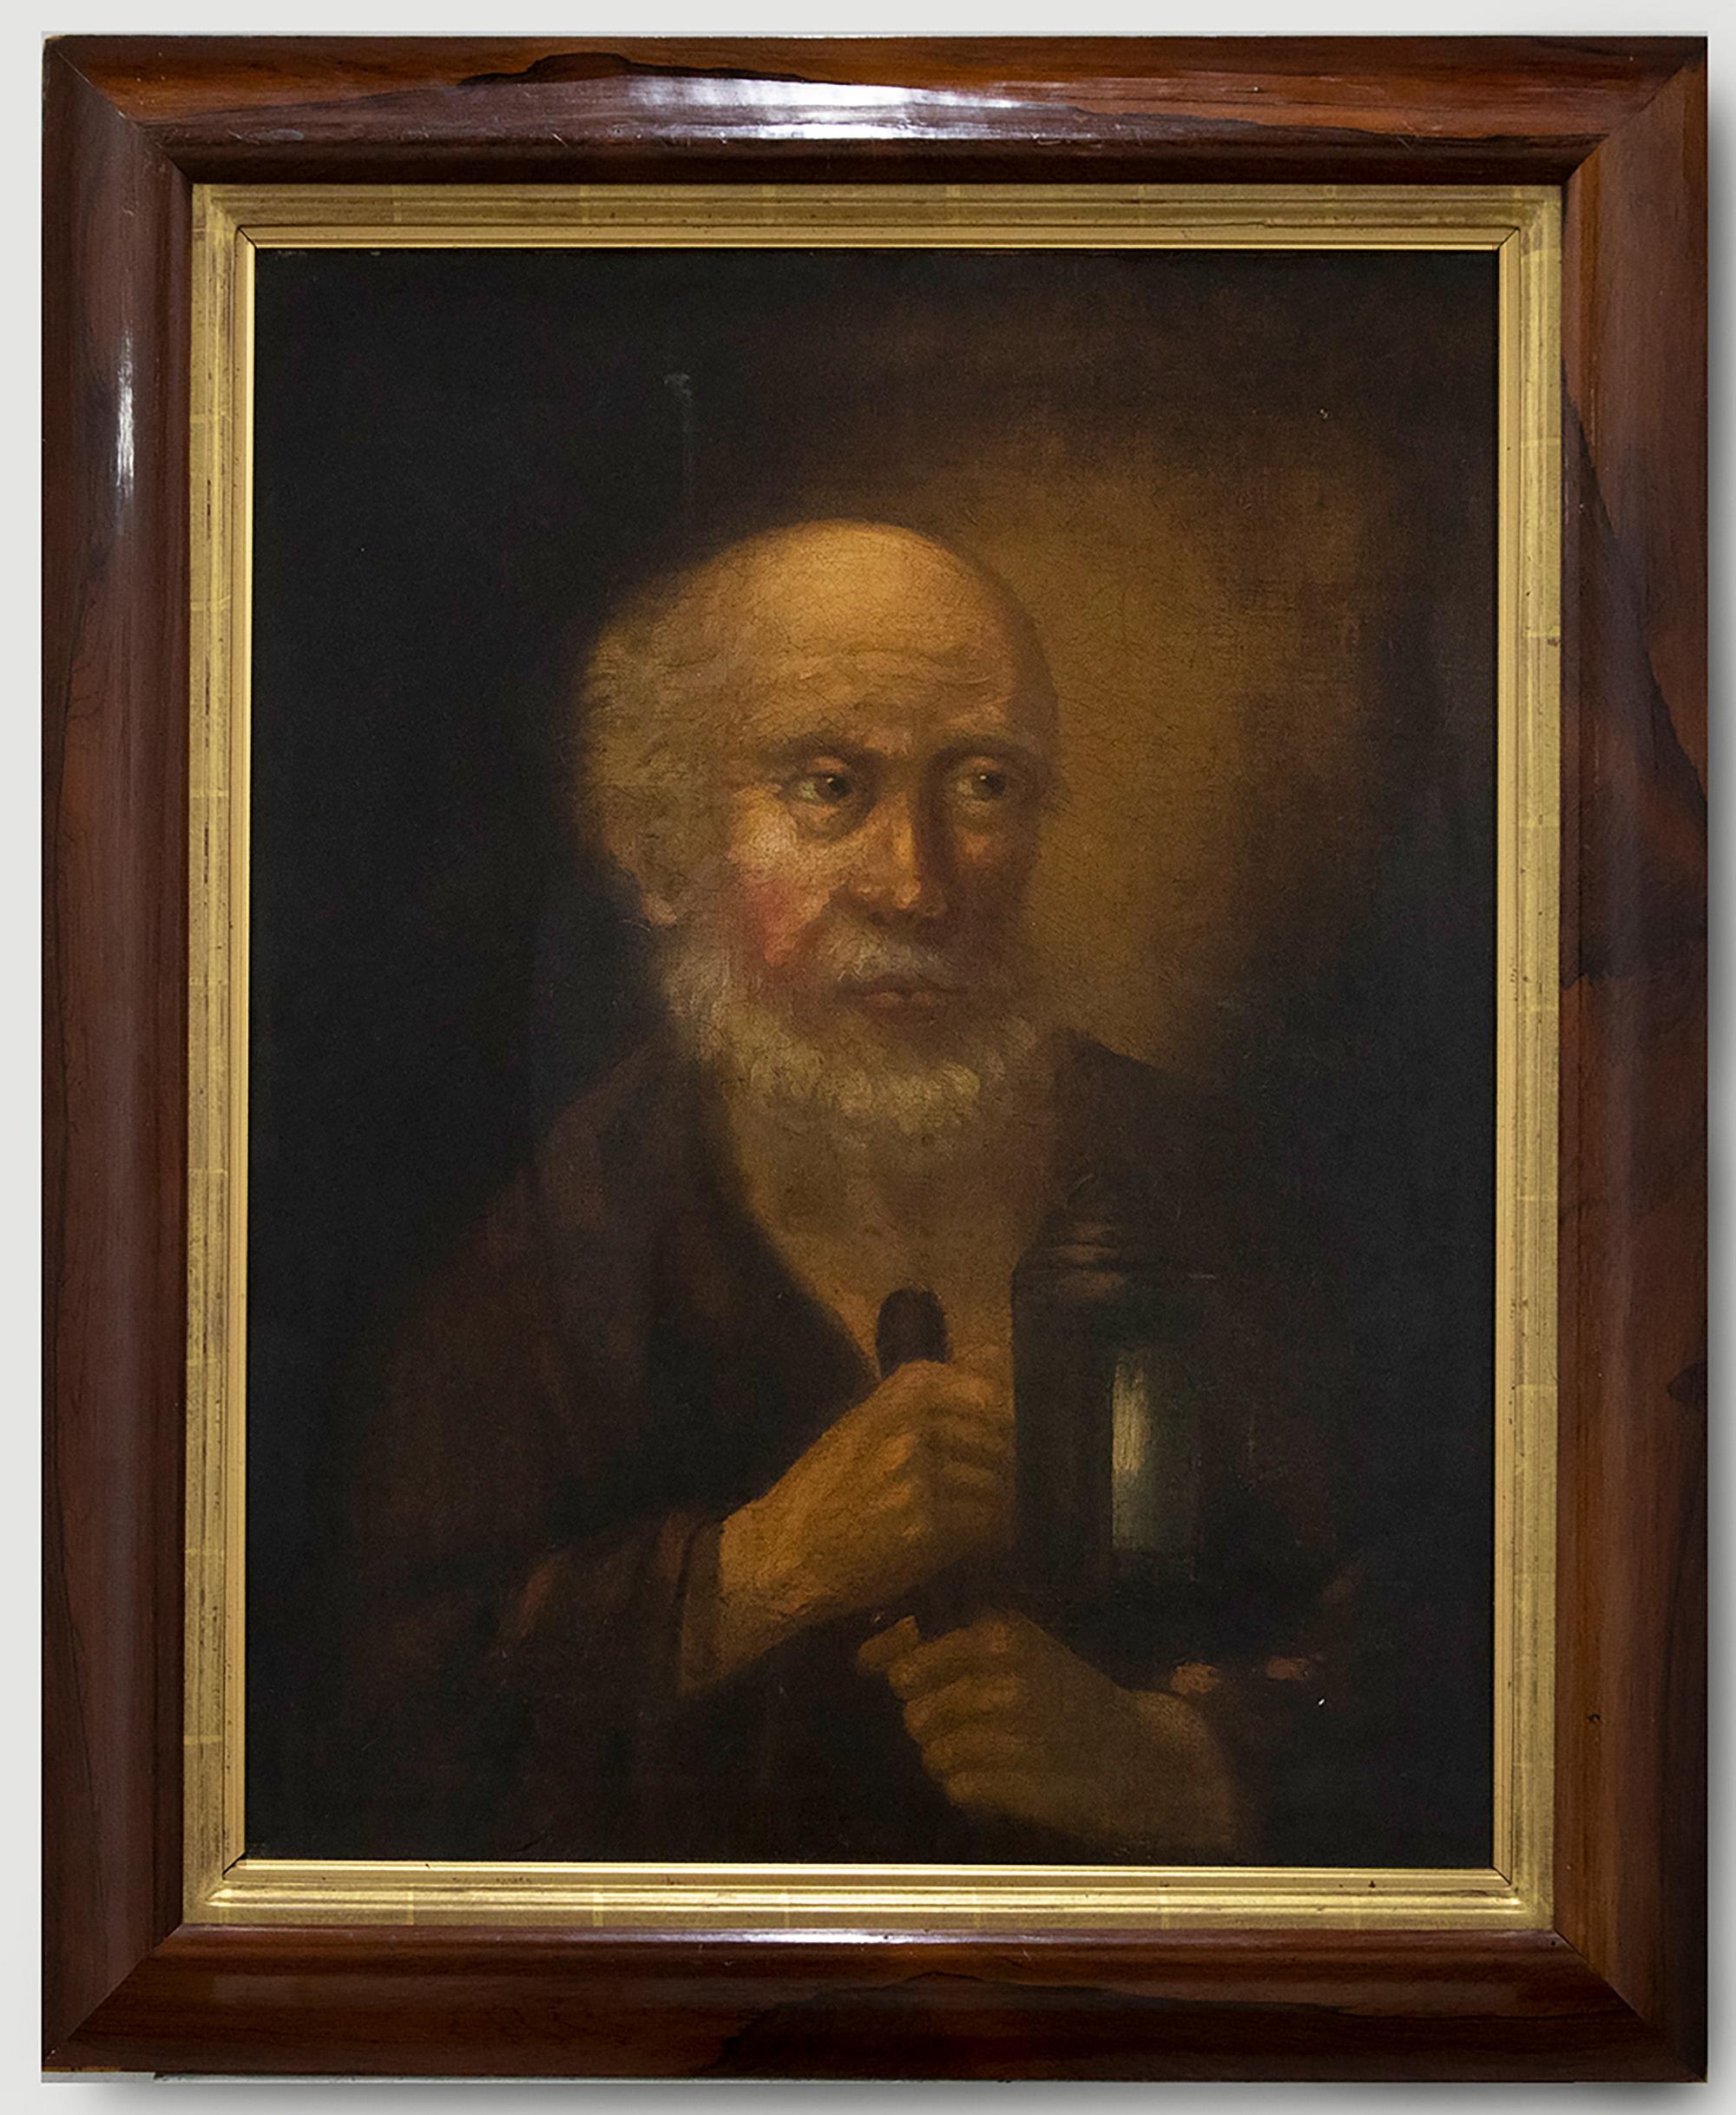 Unknown Portrait Painting - 19th Century Oil - Monk Holding a Lamp